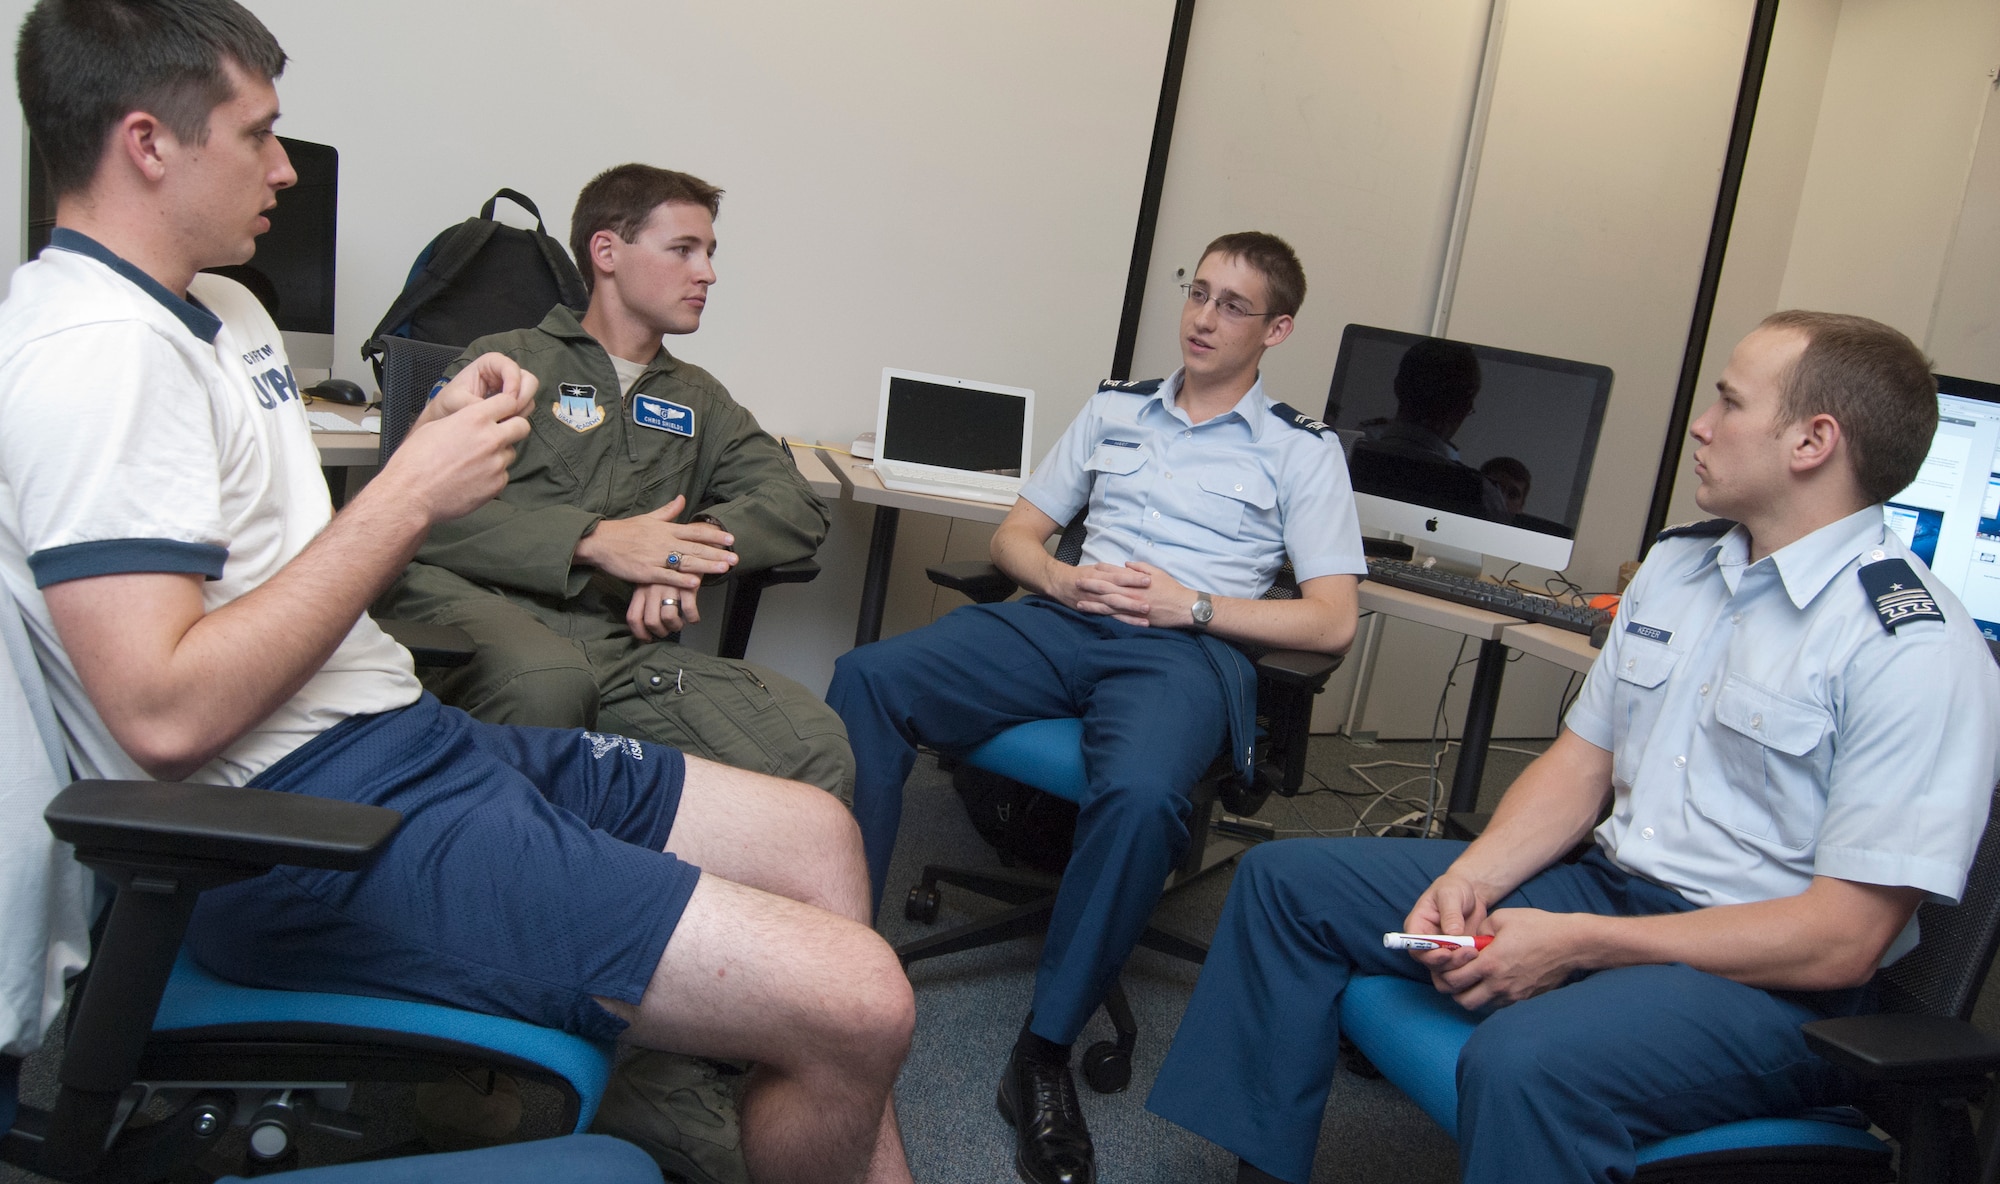 From left: Cadet 2nd Class Josh Christman, Cadet 1st Class Chris Shields, Cadet 2nd Class Nathan Hart and Cadet 1st Class Jordan Keefer discuss buffer overflow exploits during a cyber competition team meeting in the Air Force Academy's Cyberwarfare Lab Oct. 3, 2011. The team placed third out of 45 U.S. undergraduate teams in a competition hosted by the New York University Polytechnic Institute Sept. 23-25. Keefer is the team's cadet in charge. (U.S. Air Force photo/Don Branum)